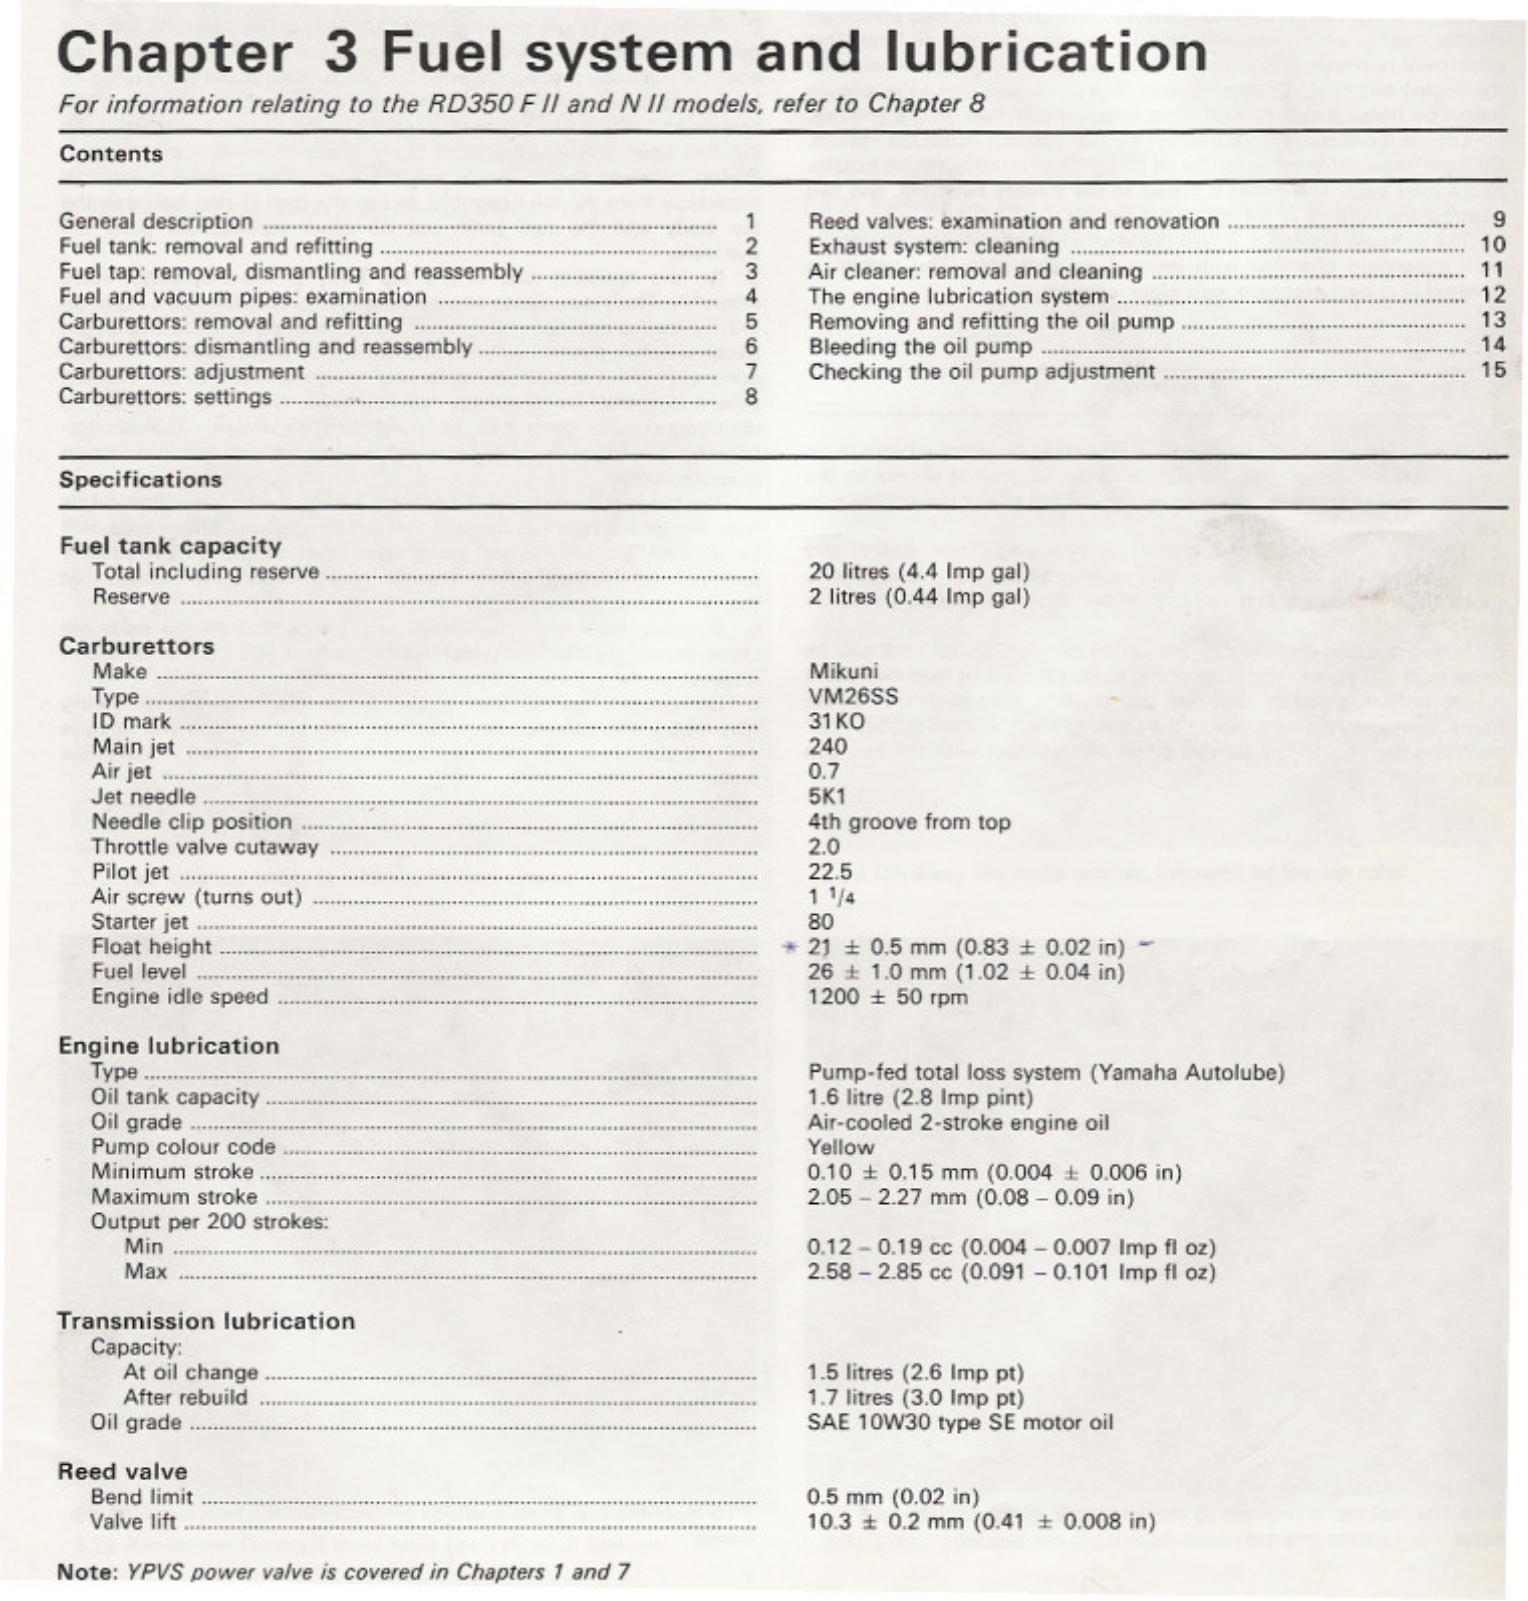 Yamaha RD350 YPVS Service Manual 3 Fuel system and lubrication